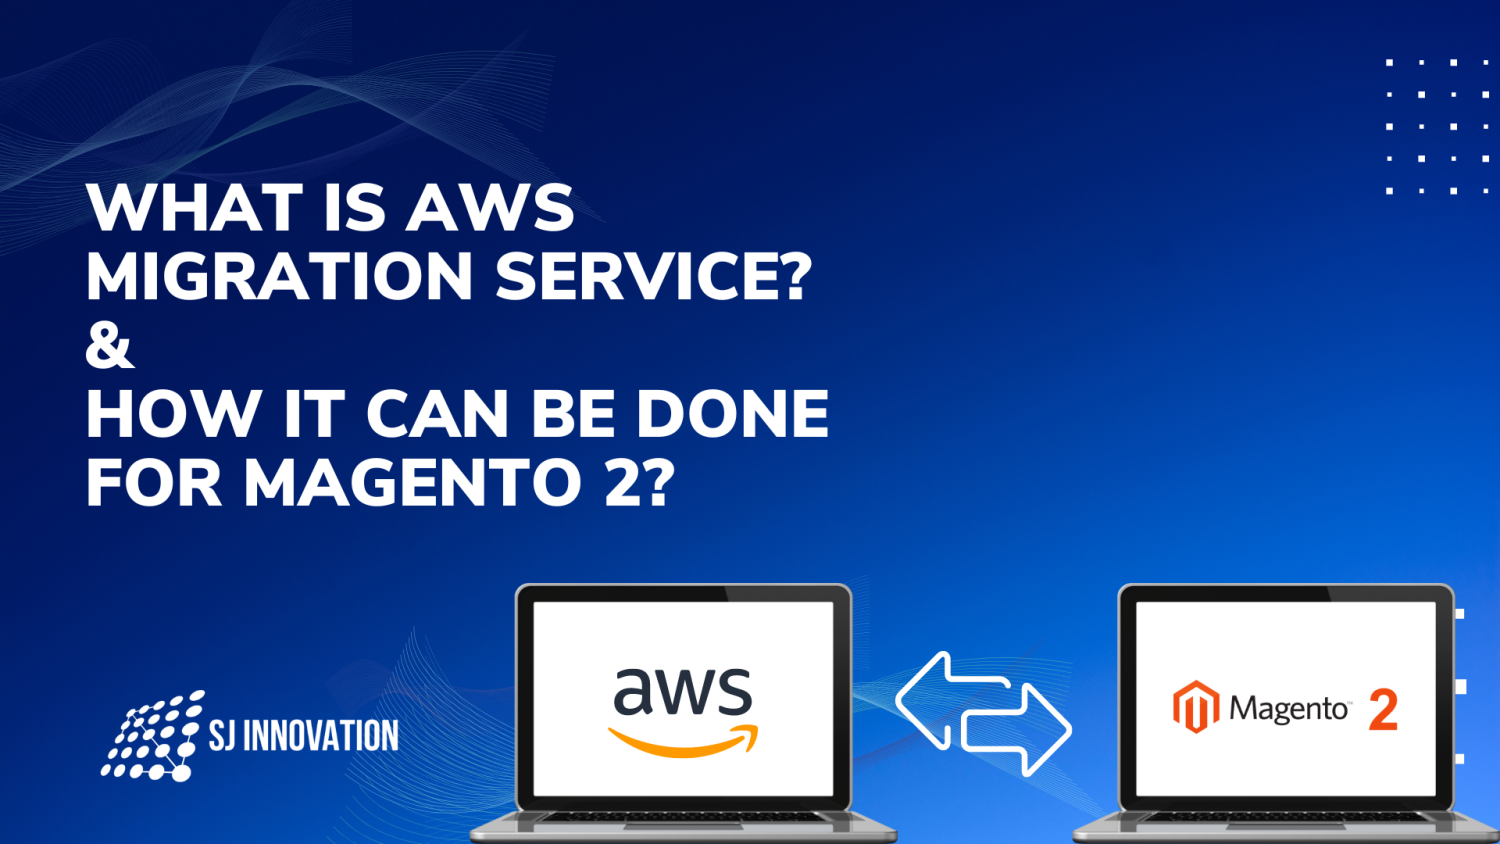 What Is AWS Migration Service? How It Can Be Done For Magento 2?